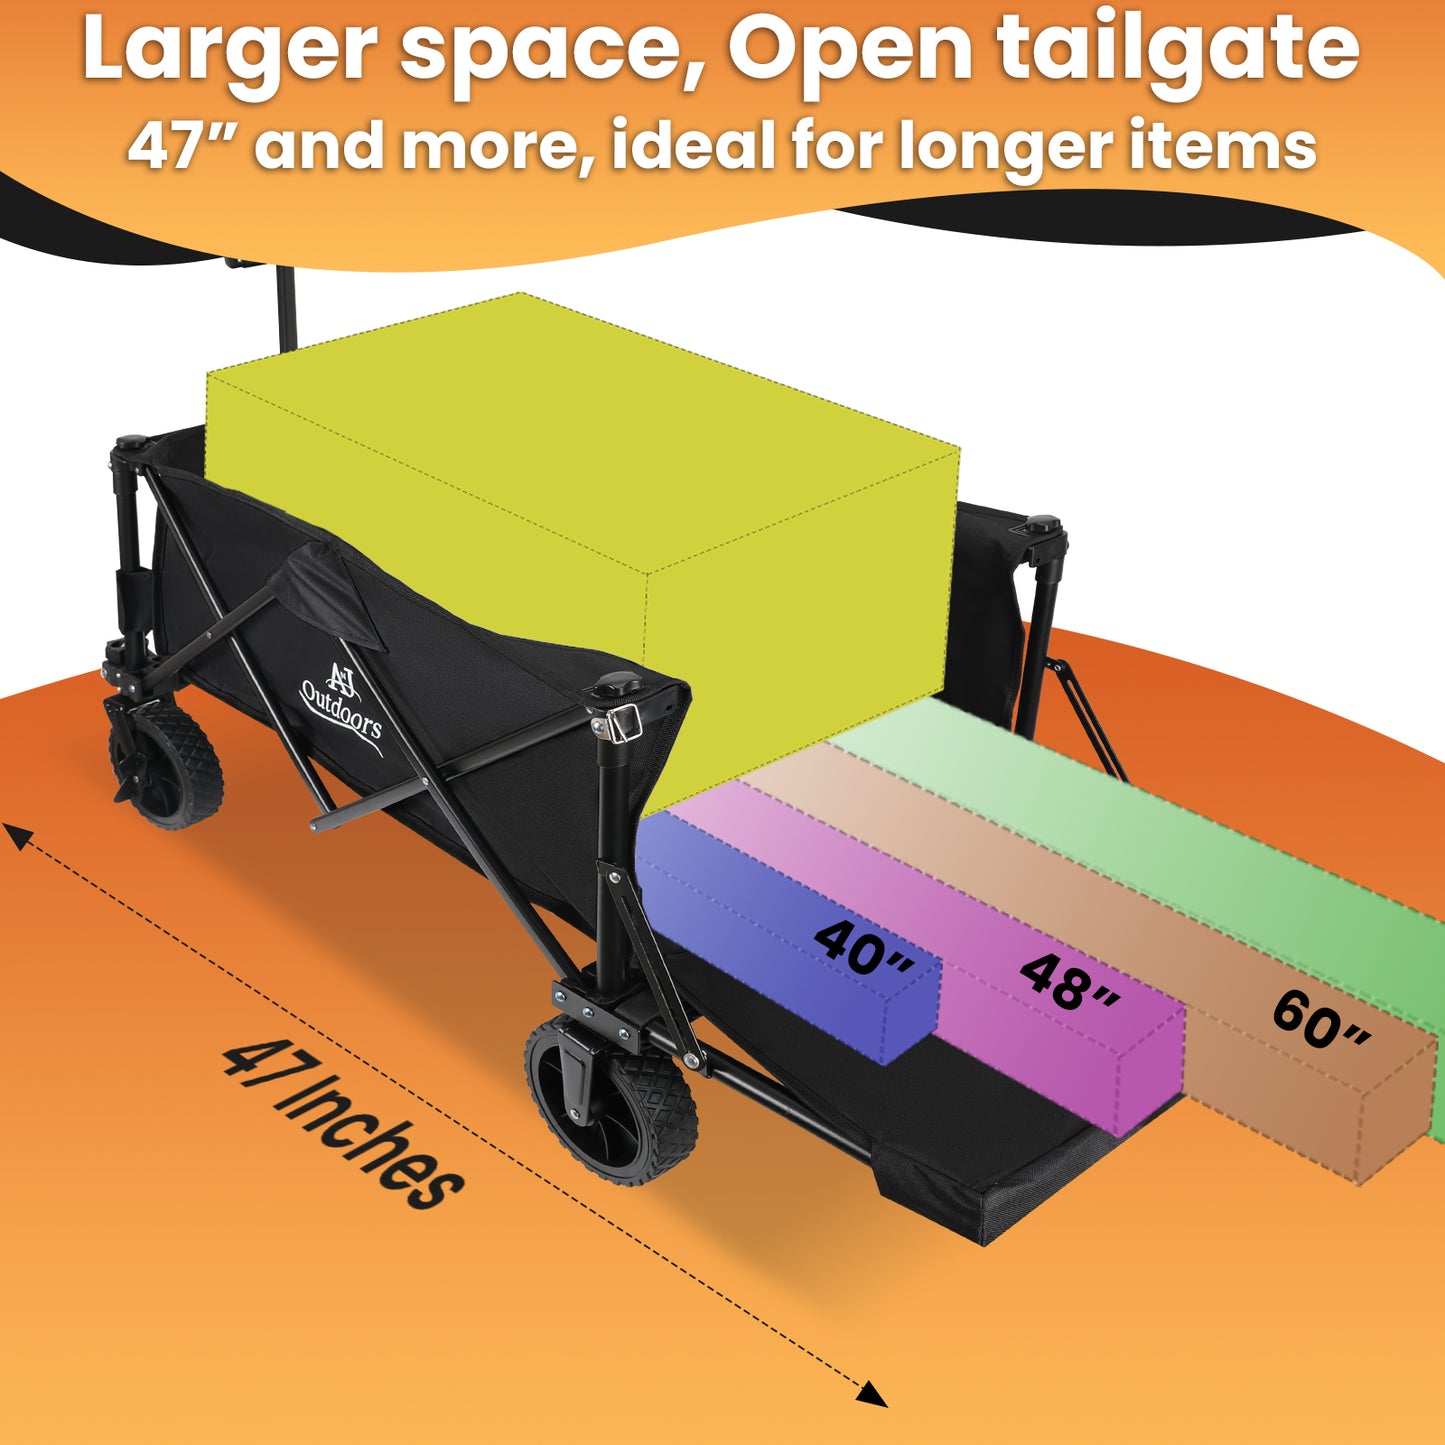 All terrain collapsible wagon cart with extending tailgate